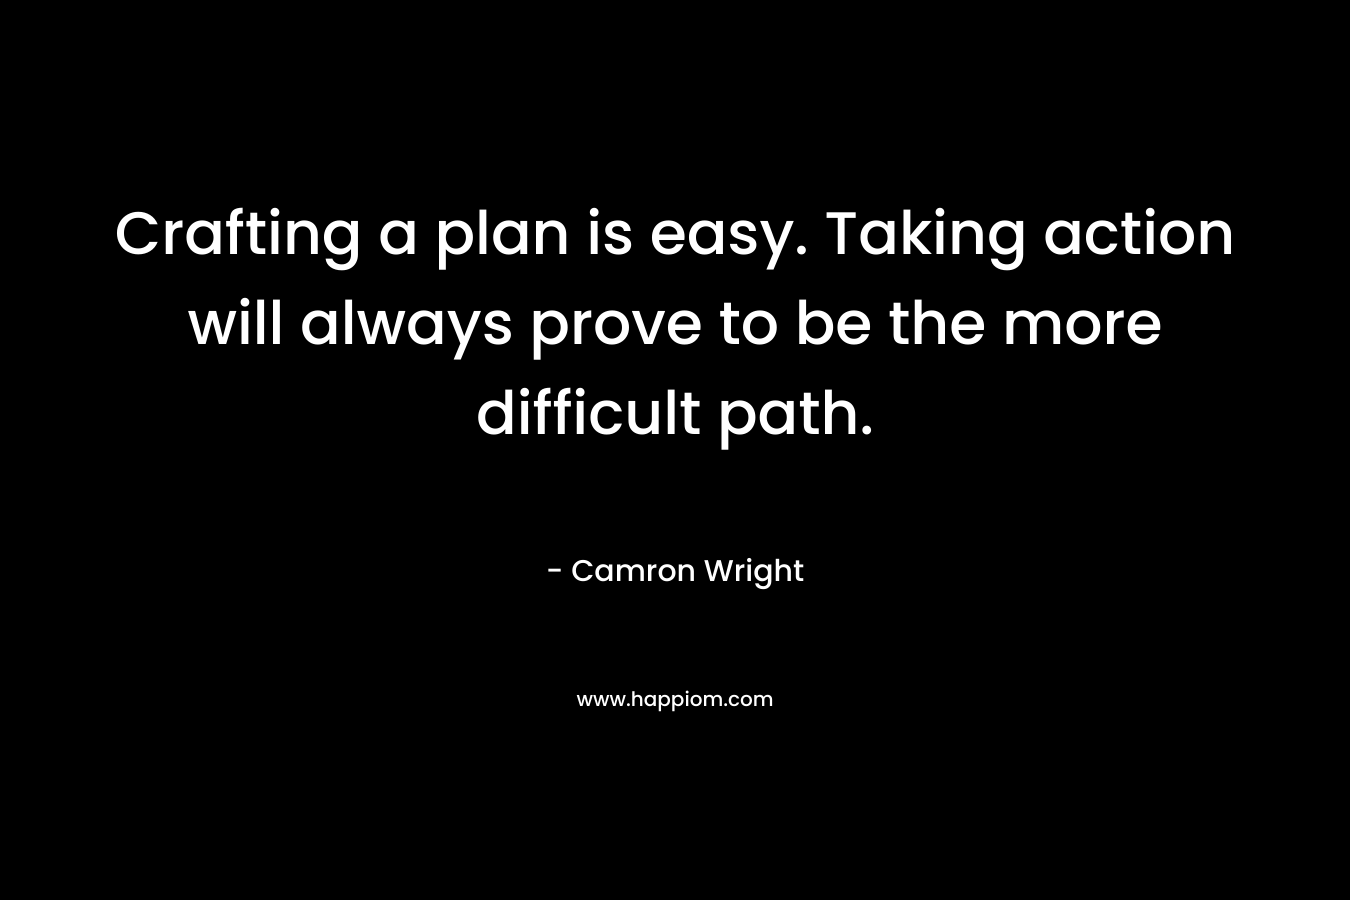 Crafting a plan is easy. Taking action will always prove to be the more difficult path. – Camron Wright